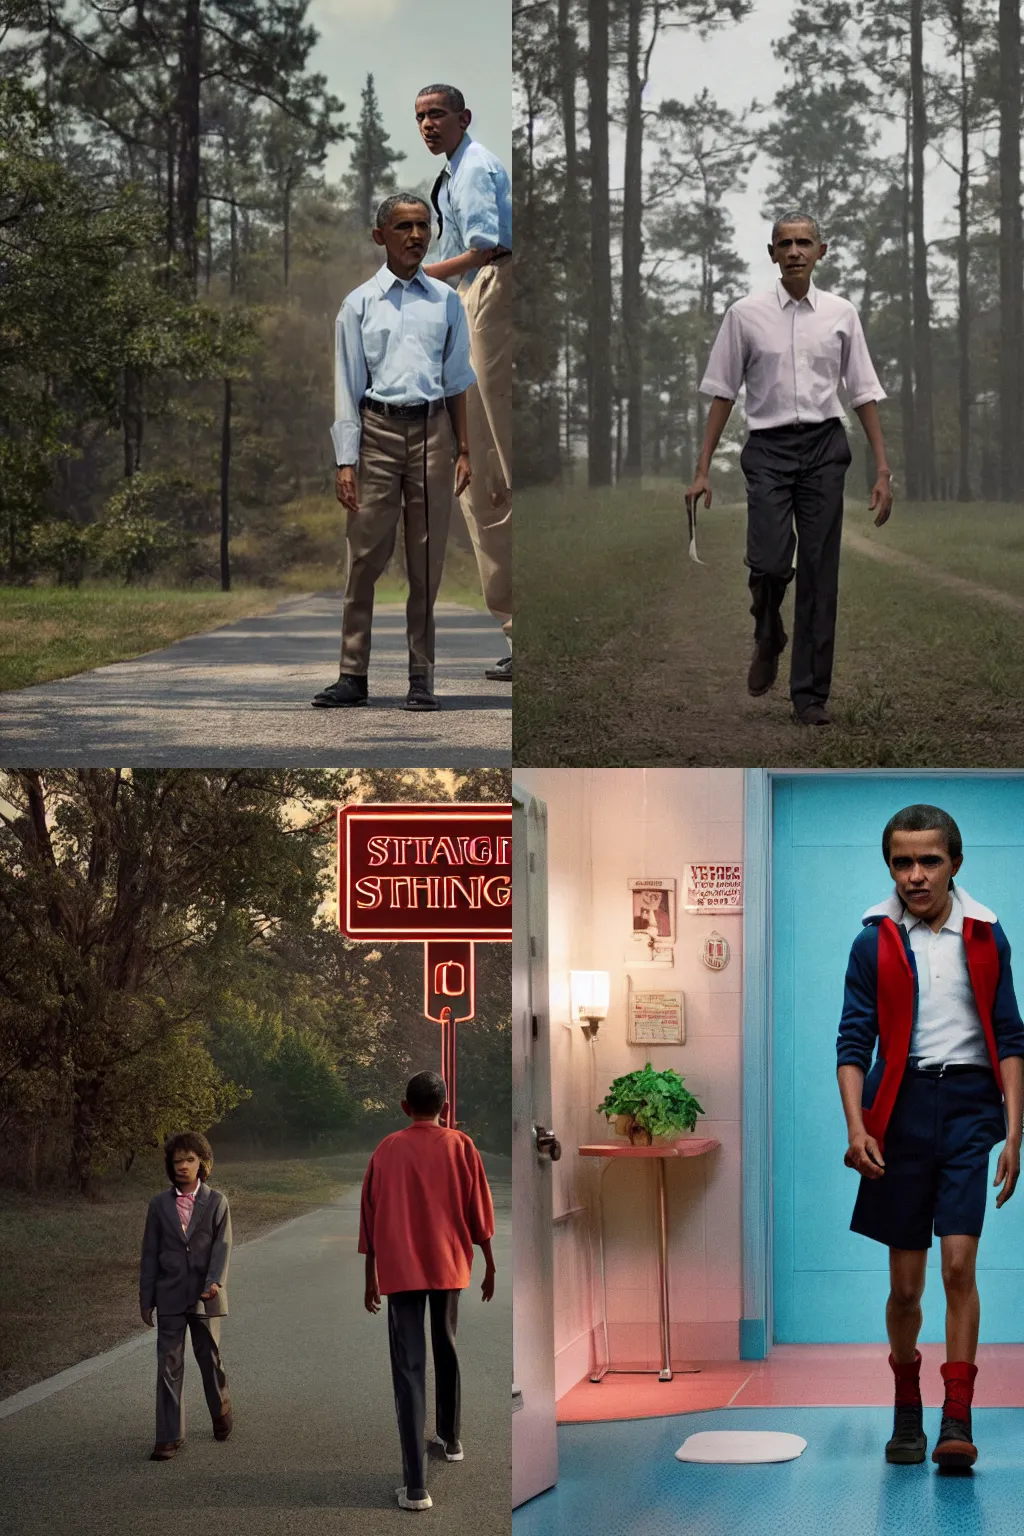 Prompt: Cinematic photography of Barack Obama in Stranger things